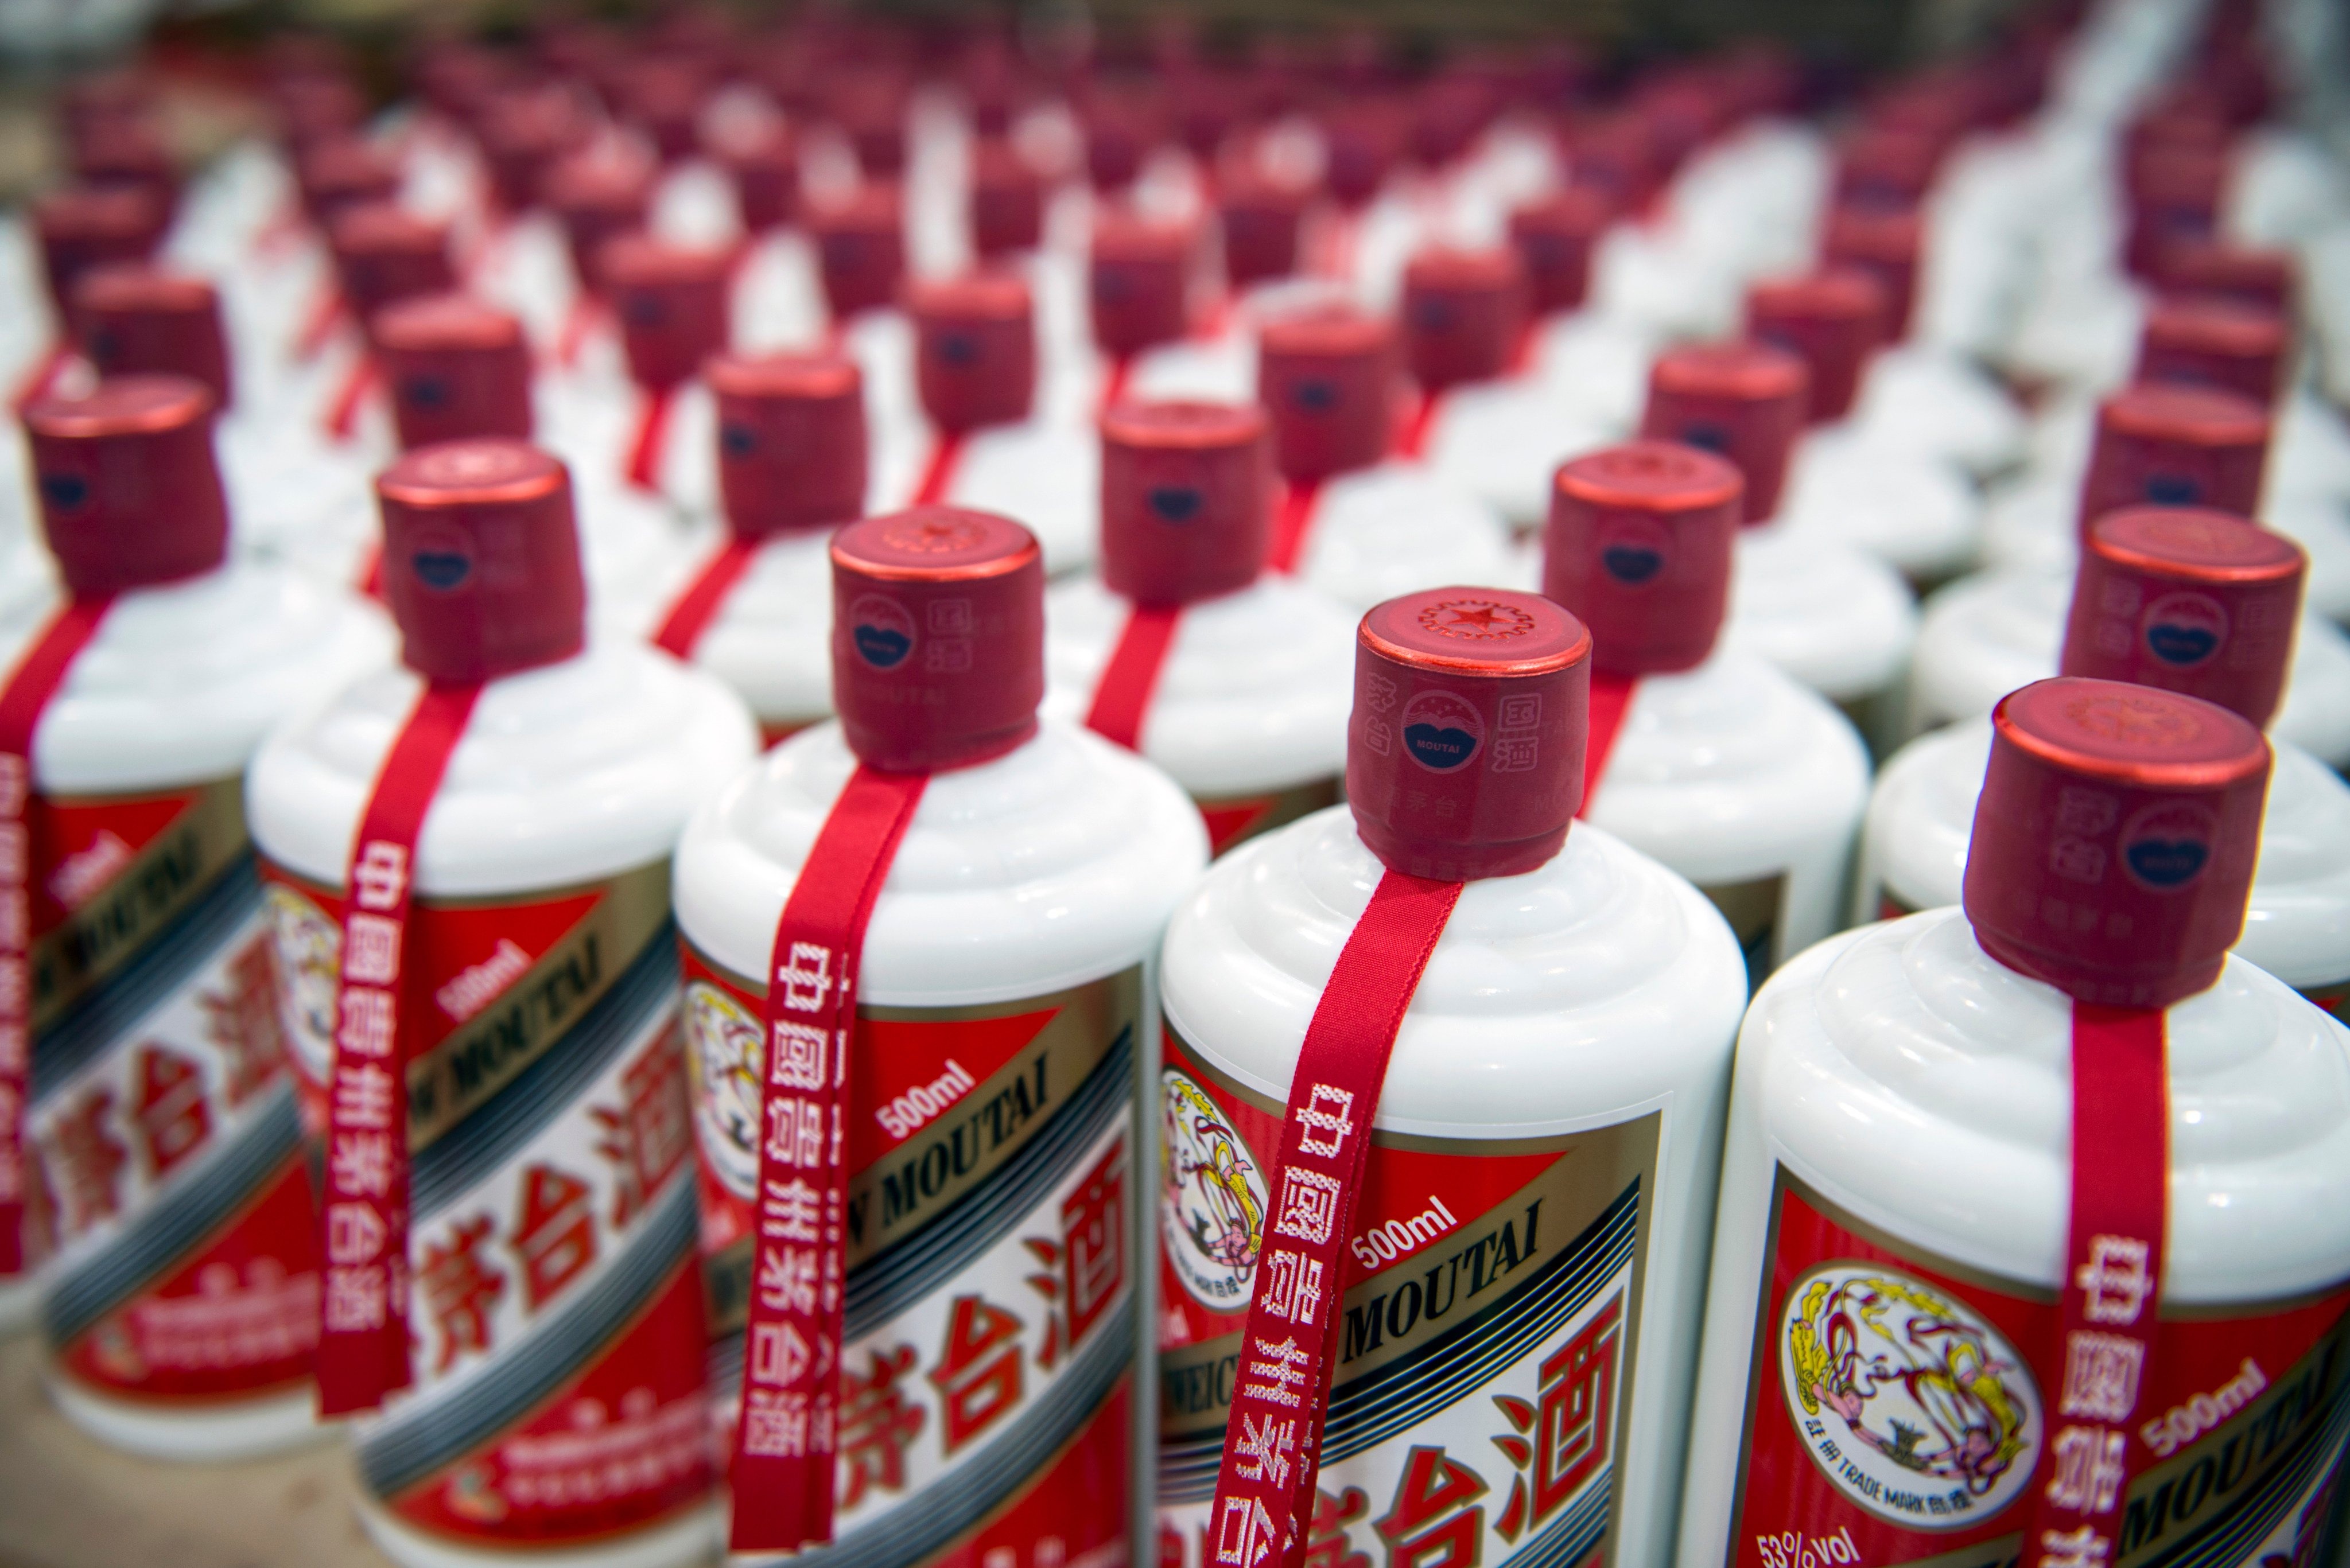 Bottles of Kweichow Moutai, at the factory in Moutai, Guizhou province where much of China’s national drink, baijiu, is distilled for markets at home – and increasingly – abroad. Photo: Zigor Aldama